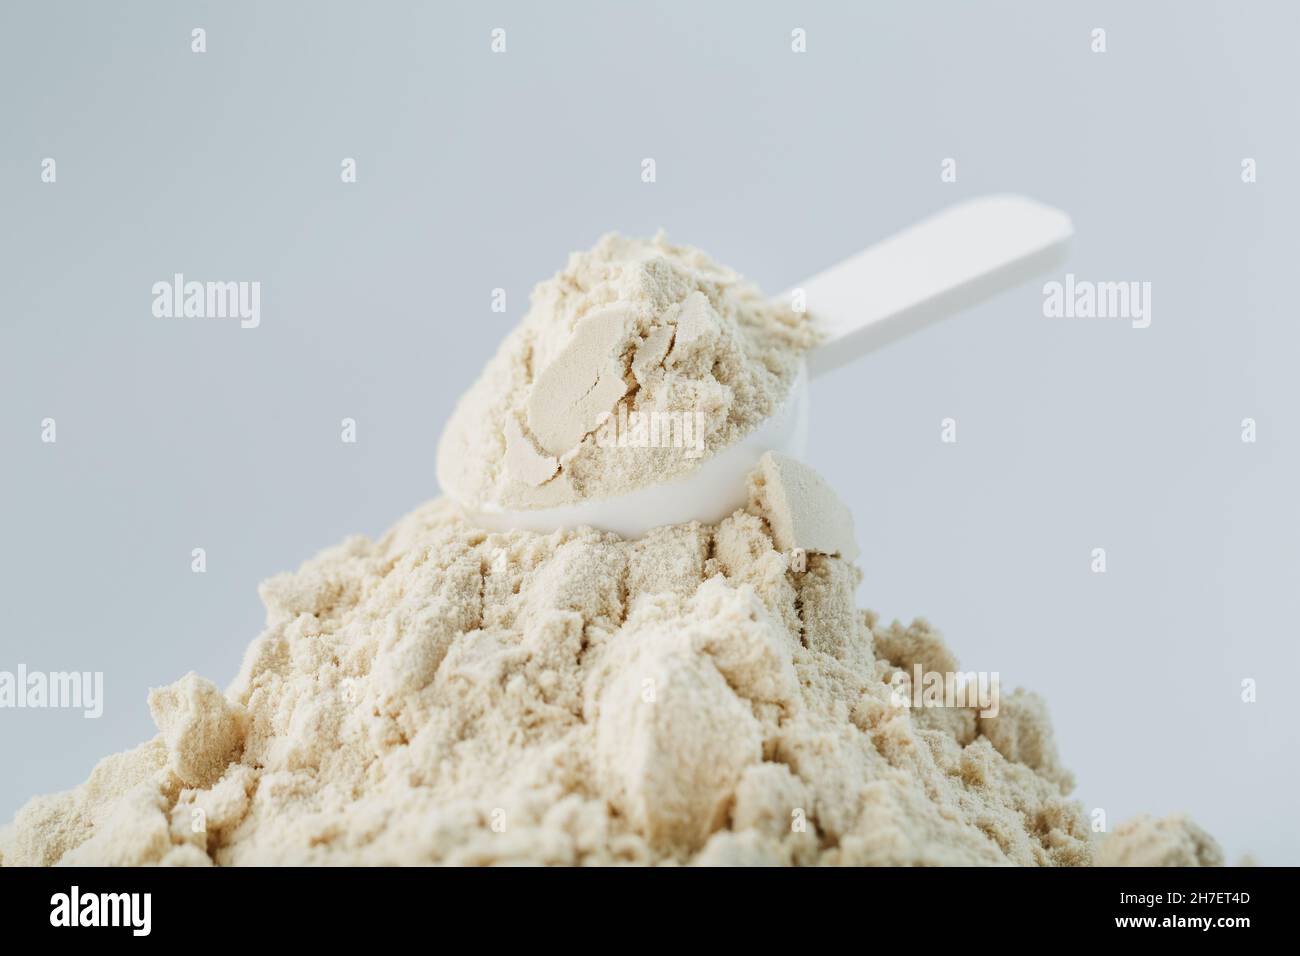 https://c8.alamy.com/comp/2H7ET4D/whey-protein-isolate-with-a-measuring-spoon-on-a-white-background-sports-nutrition-of-athletes-2H7ET4D.jpg